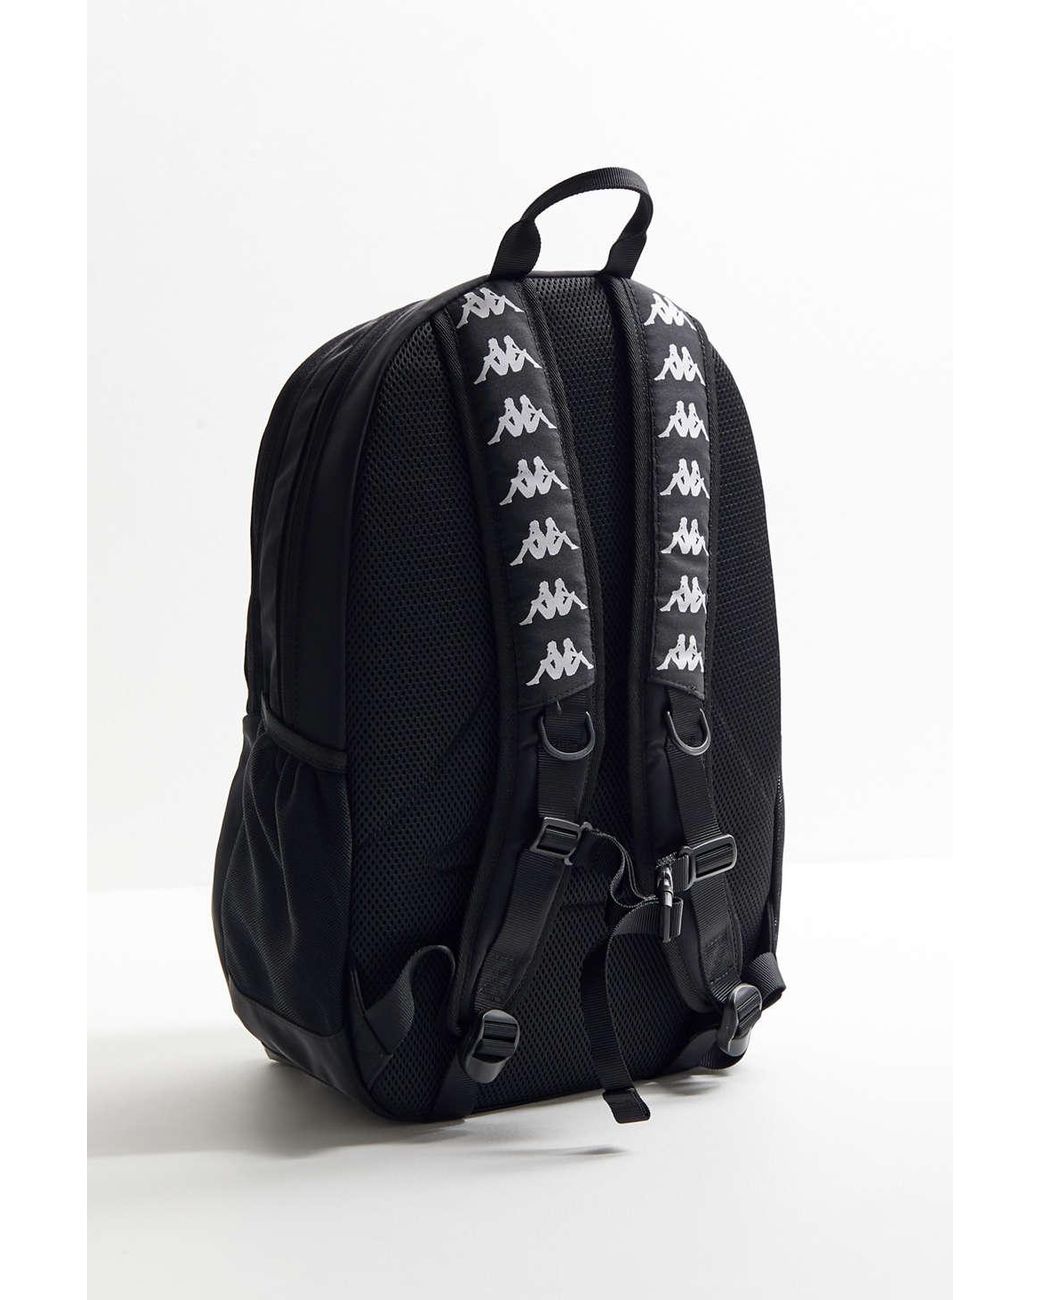 Kappa The Premium Backpack In Black And White | Lyst